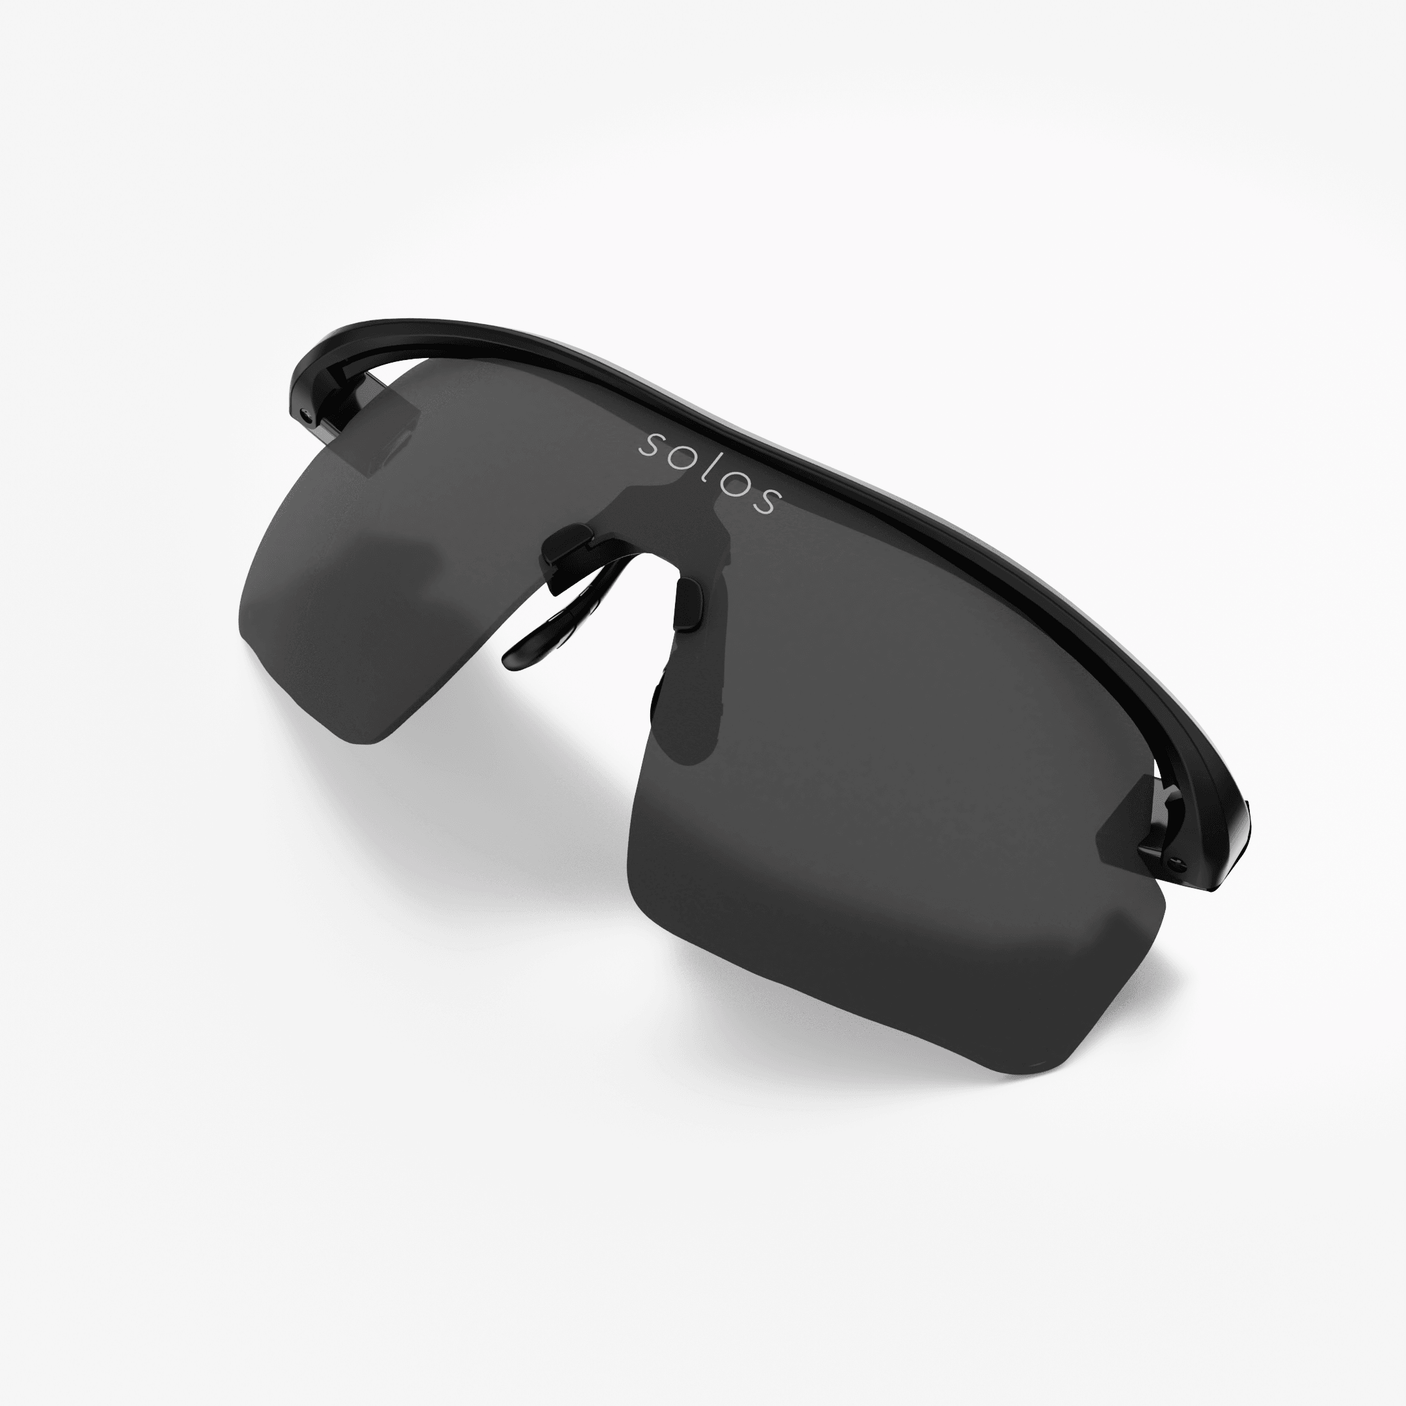 Helium 2 Smart Sport Sunglasses | Asian-Fit | AirGo™3 - Solos Technology Limited